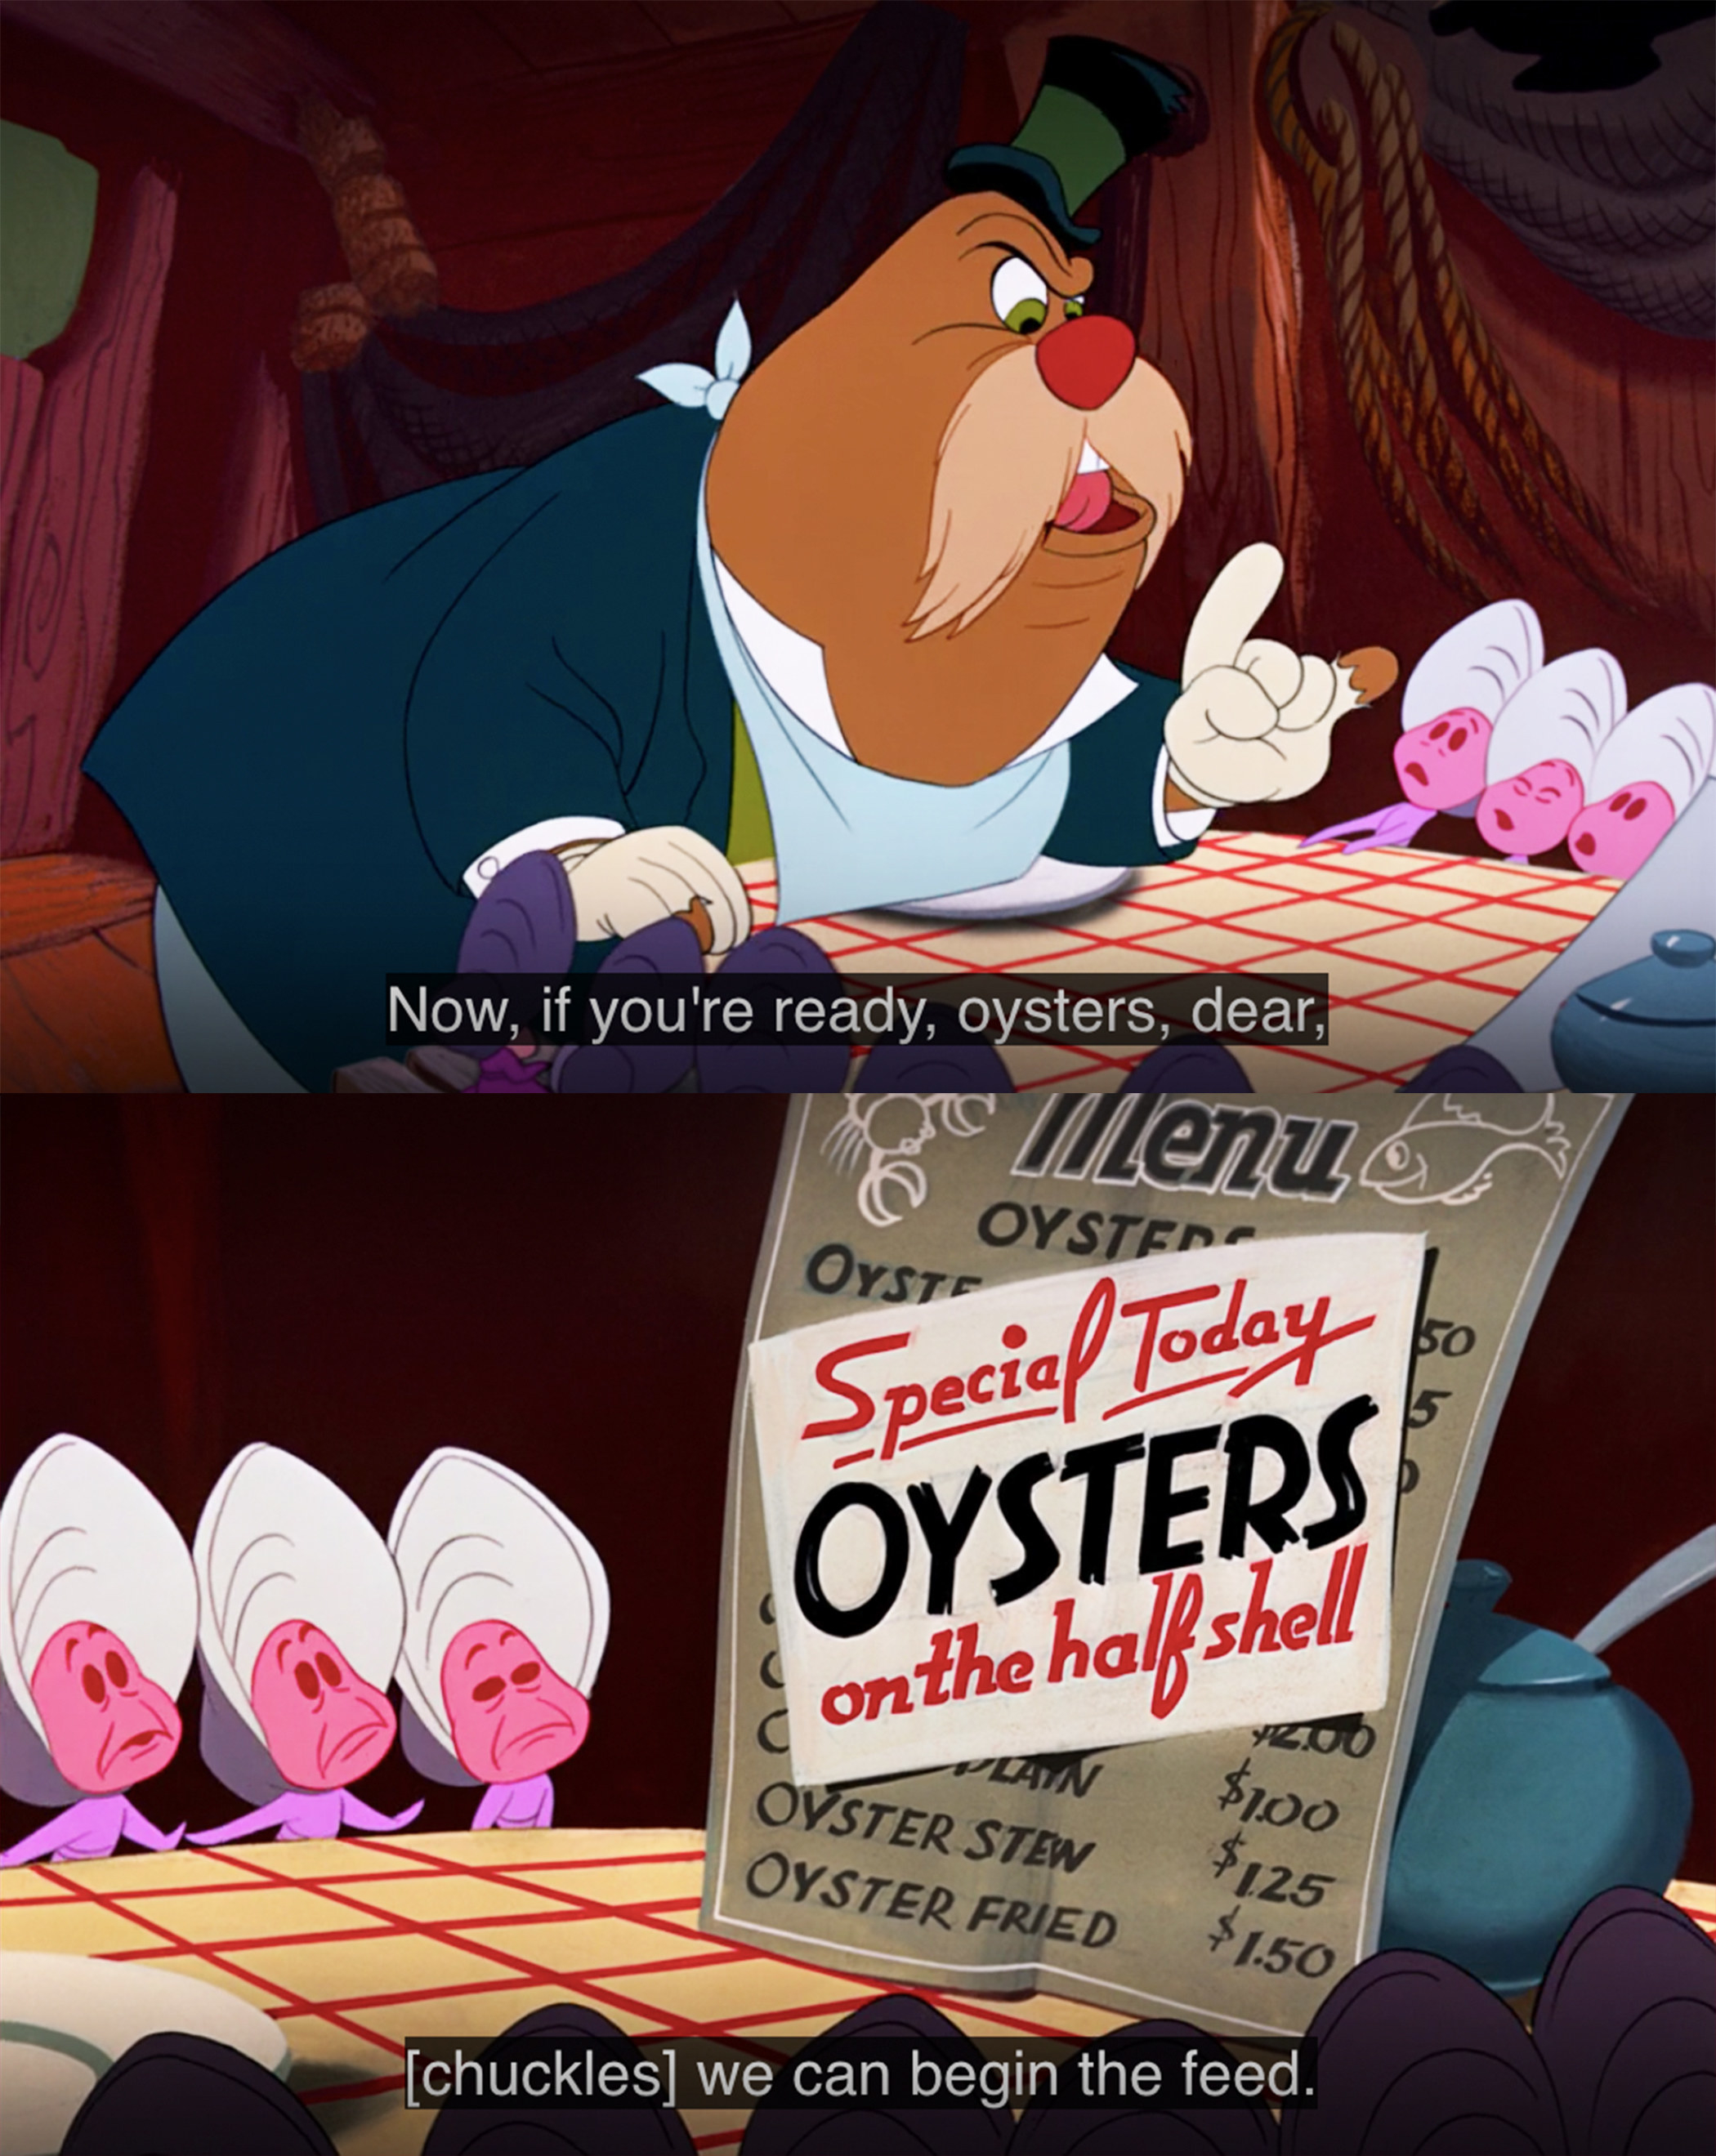 the baby oysters realize the walrus plans to eat them